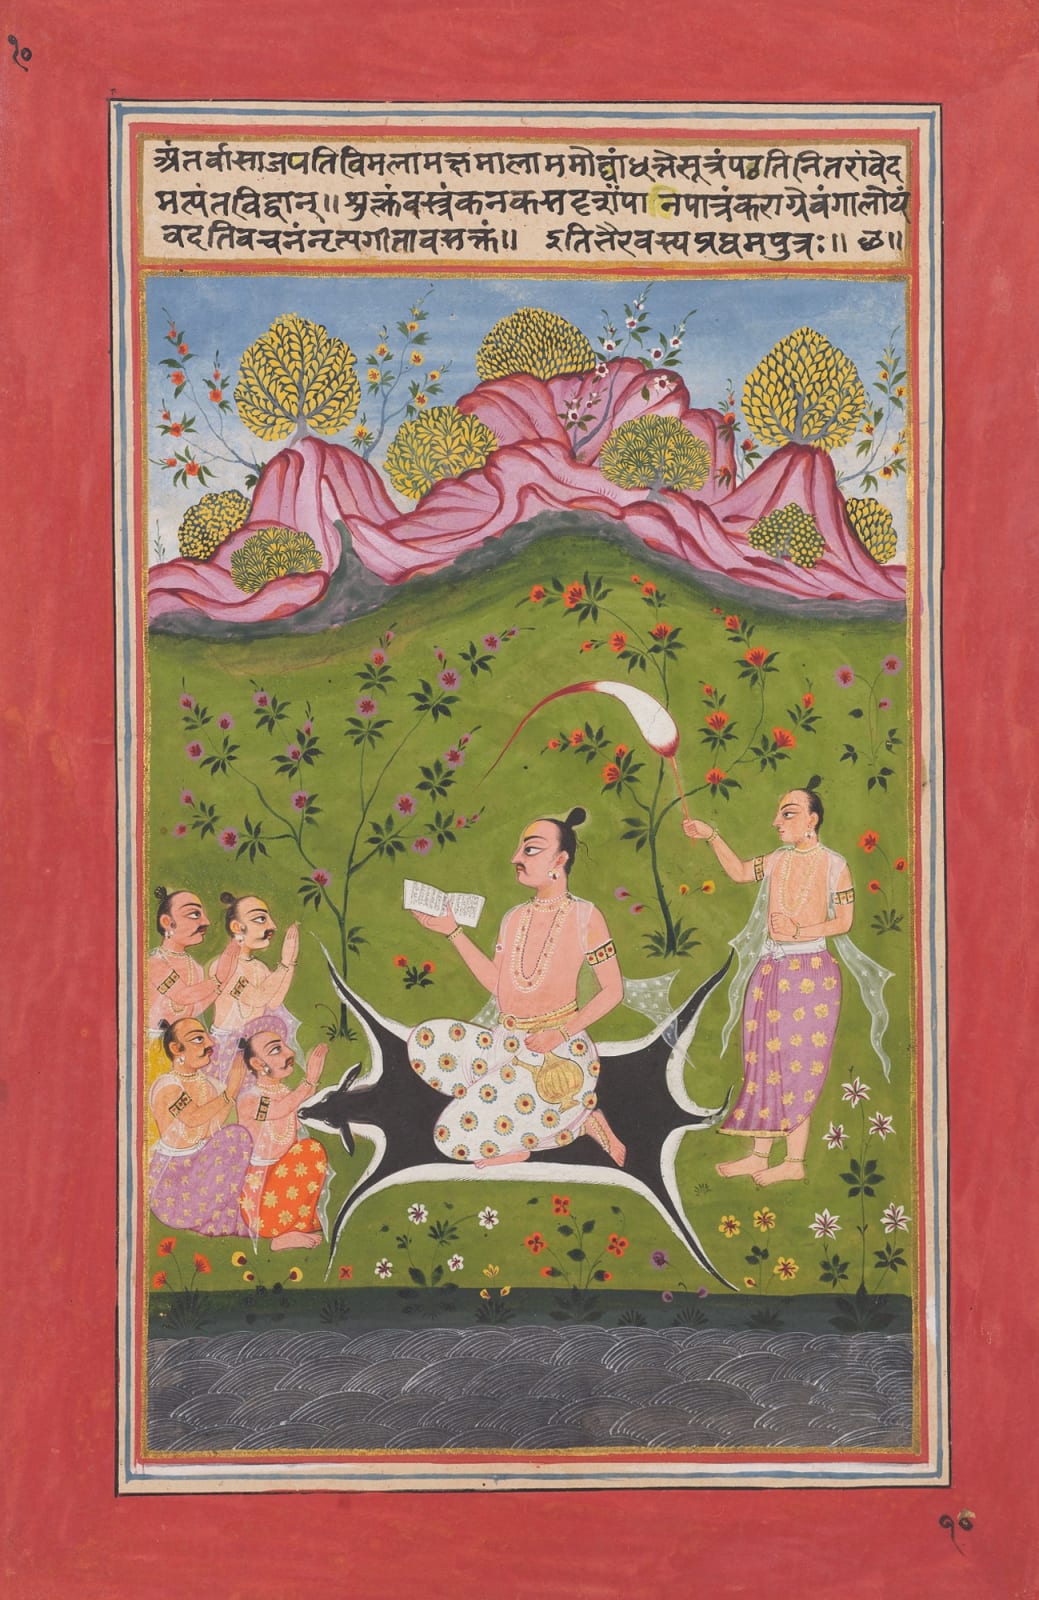 Vangala Putra (the first Son of Raga Bhairava), By an artist from the Northern Deccan, c. 1700